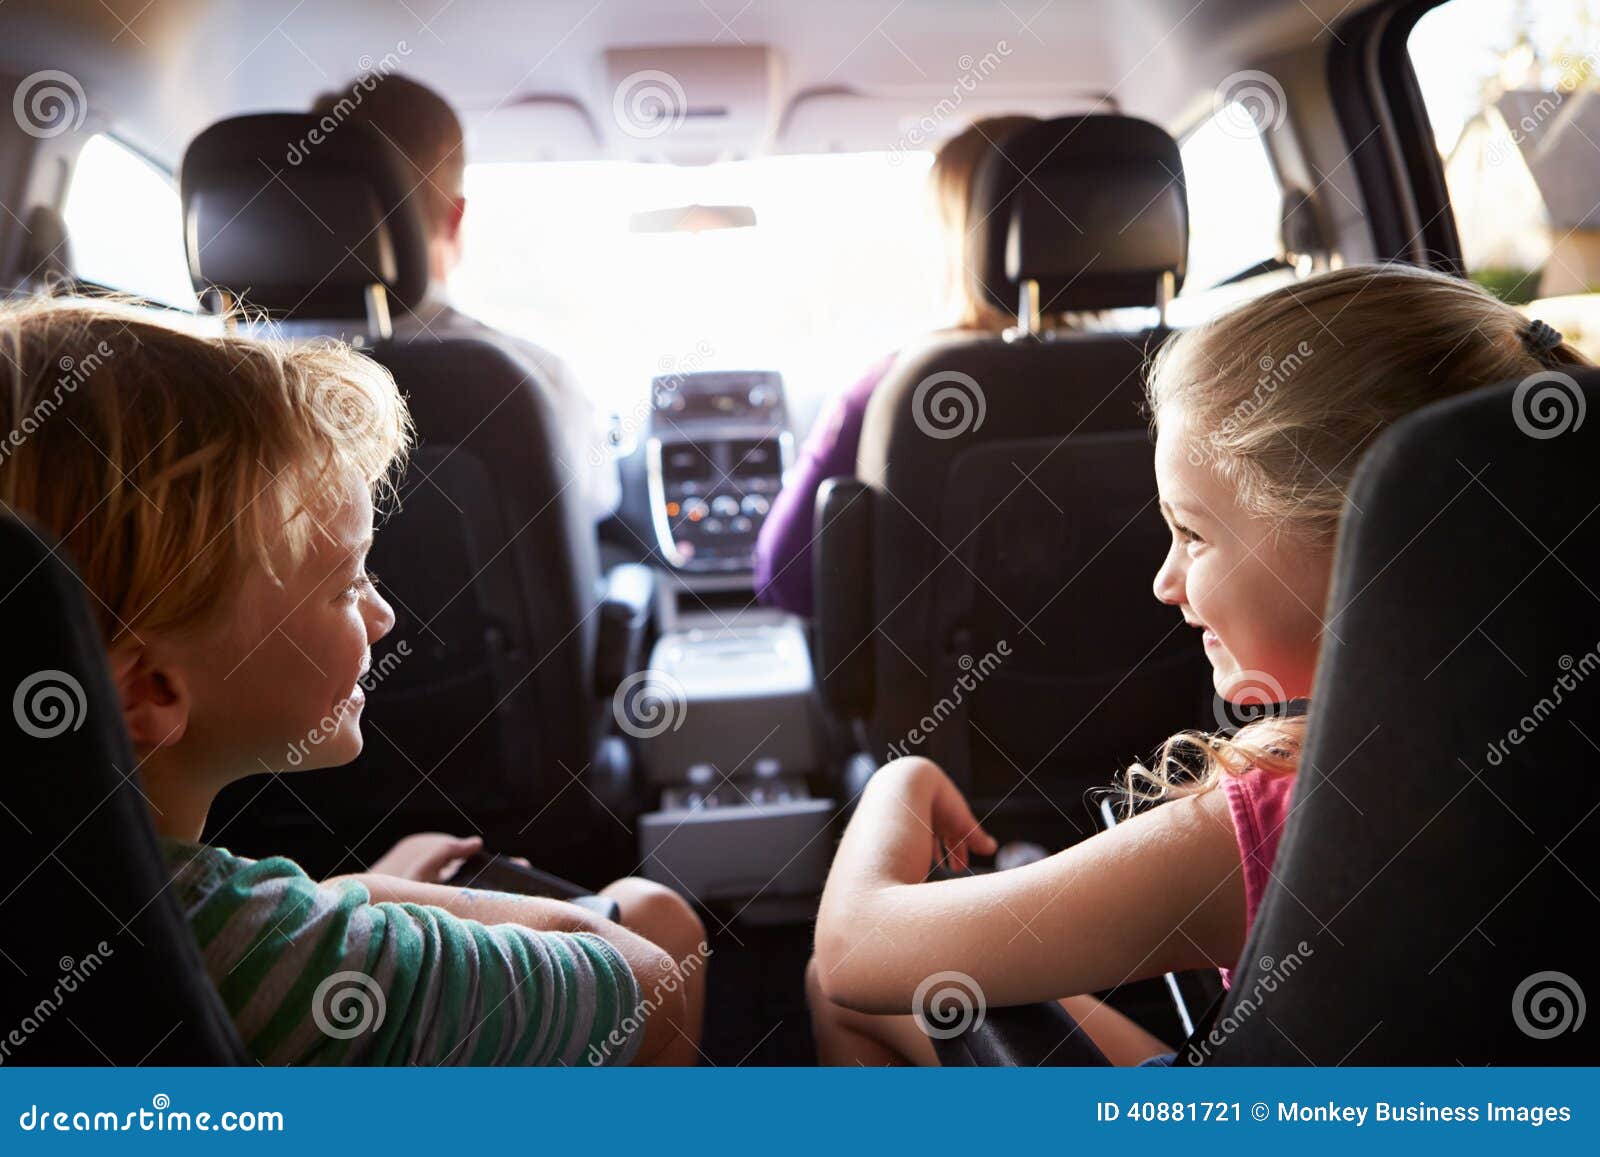 children in back seat of car on journey with parents